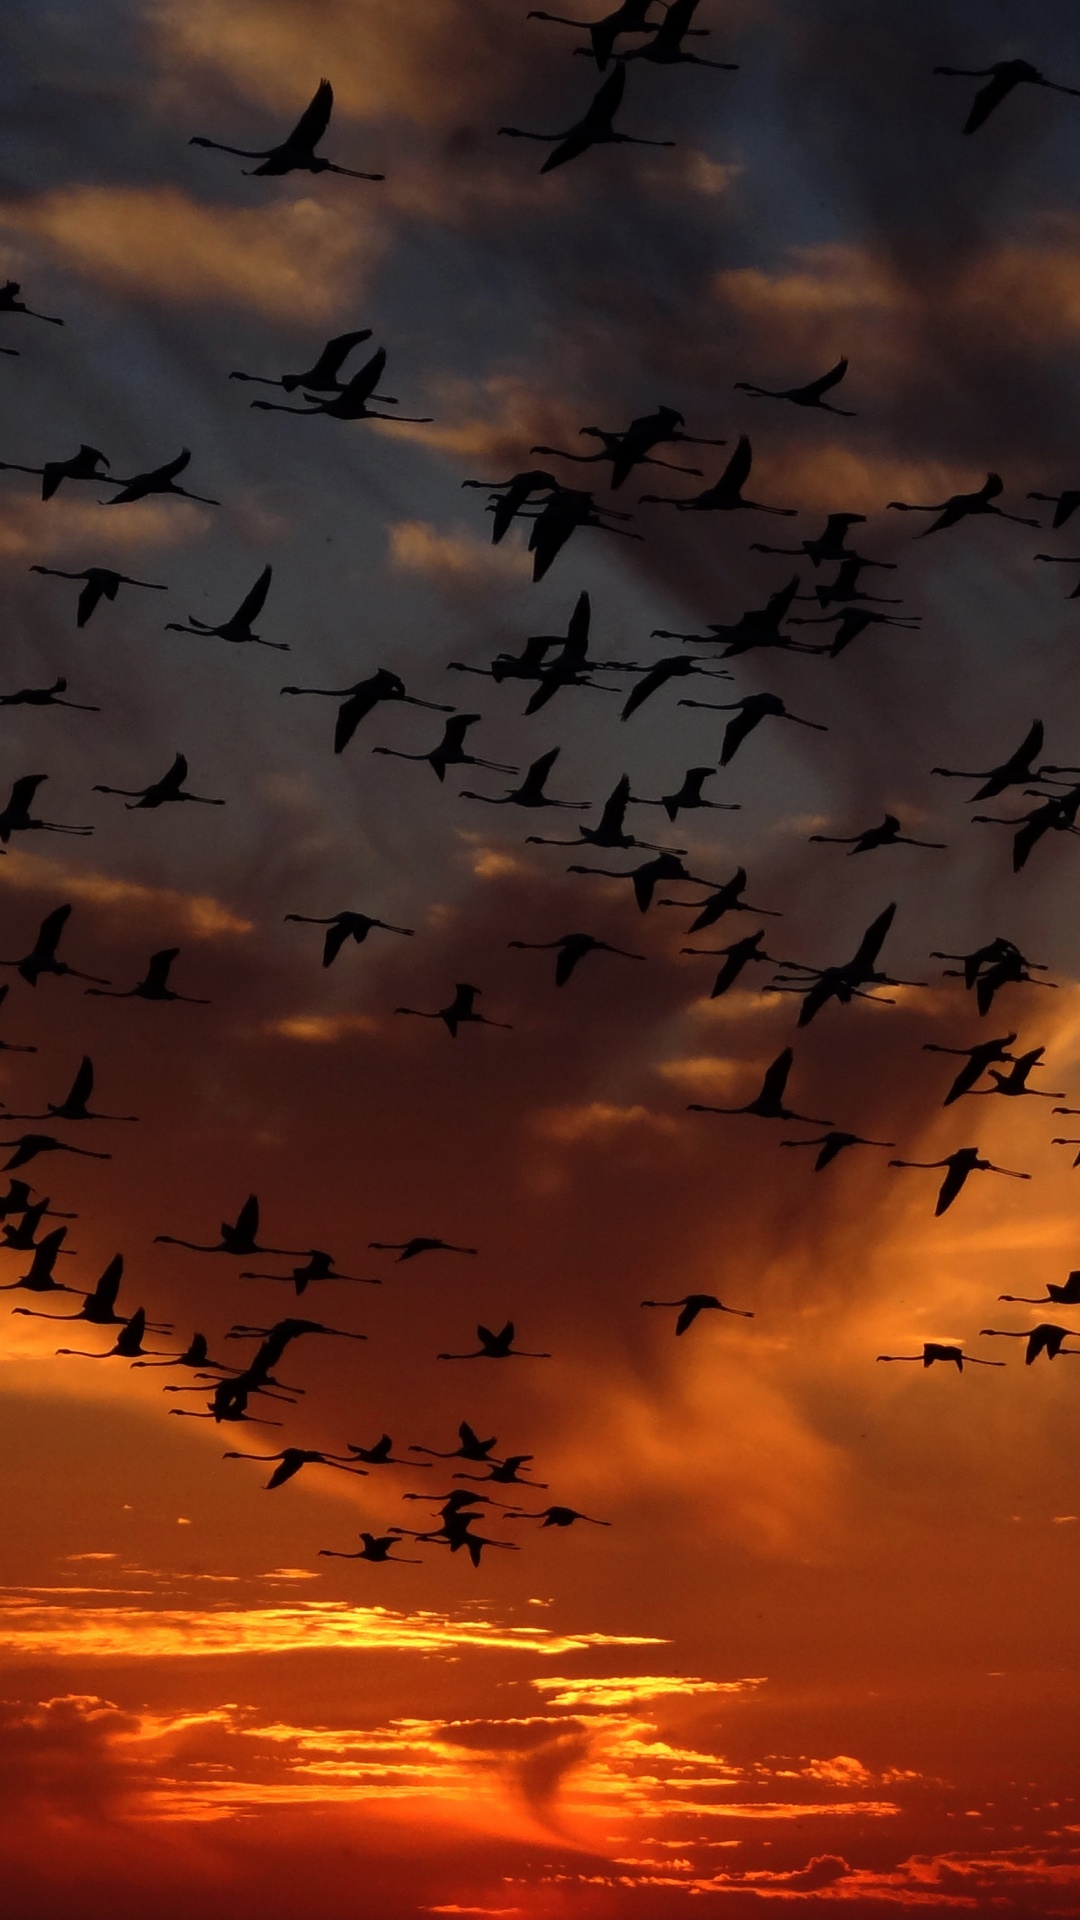 Silhouette of Flock of Birds Flying During Sunset. Wallpaper in 1080x1920 Resolution